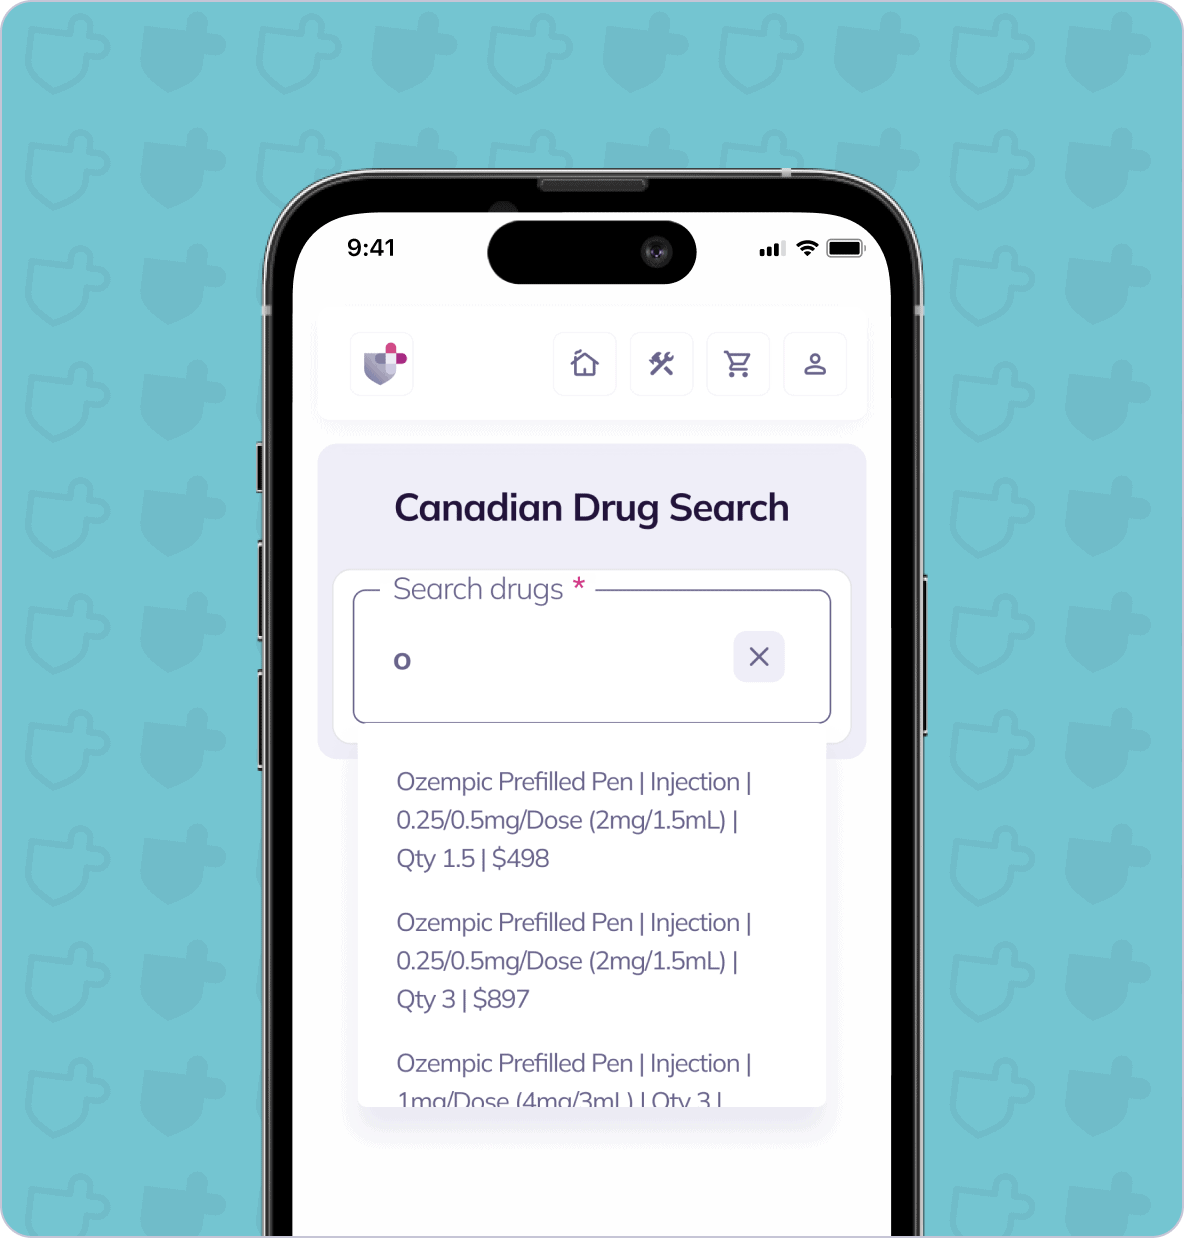 Smartphone display showing a "Canadian Drug Search" webpage with a search bar and a dropdown menu listing various dosages and prices of Ozempic prefilled pens.